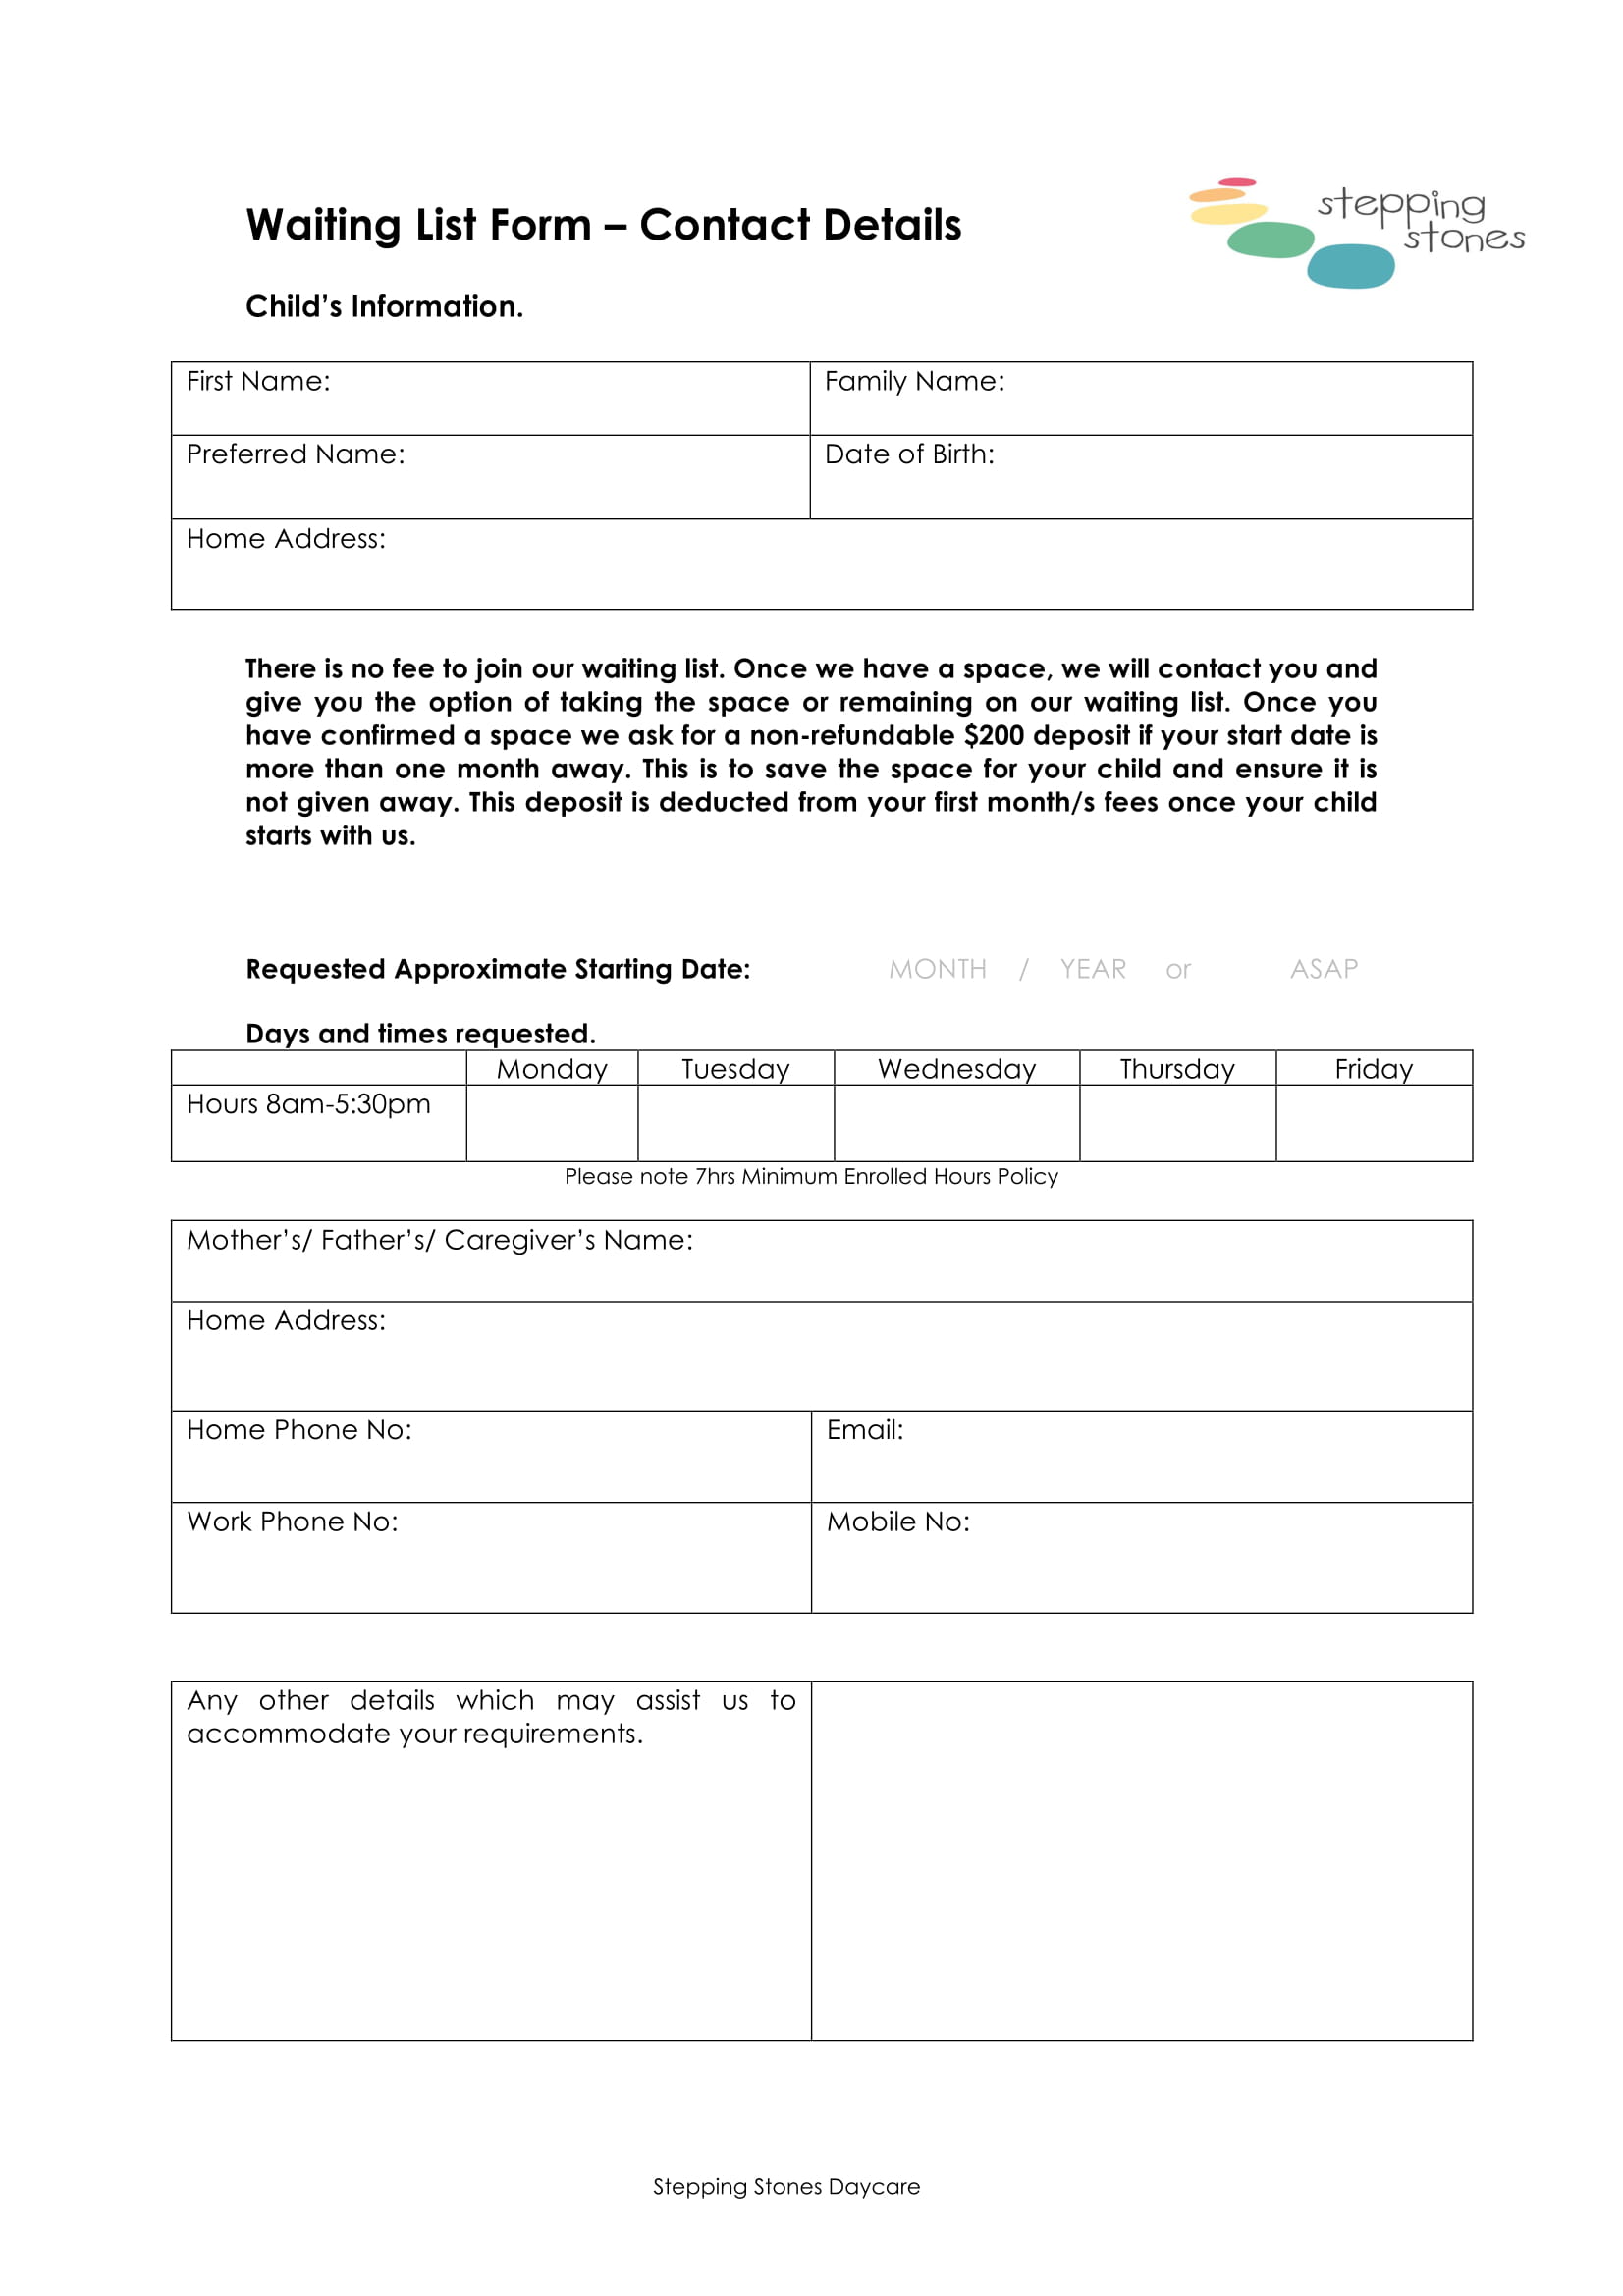 daycare waiting list form 1